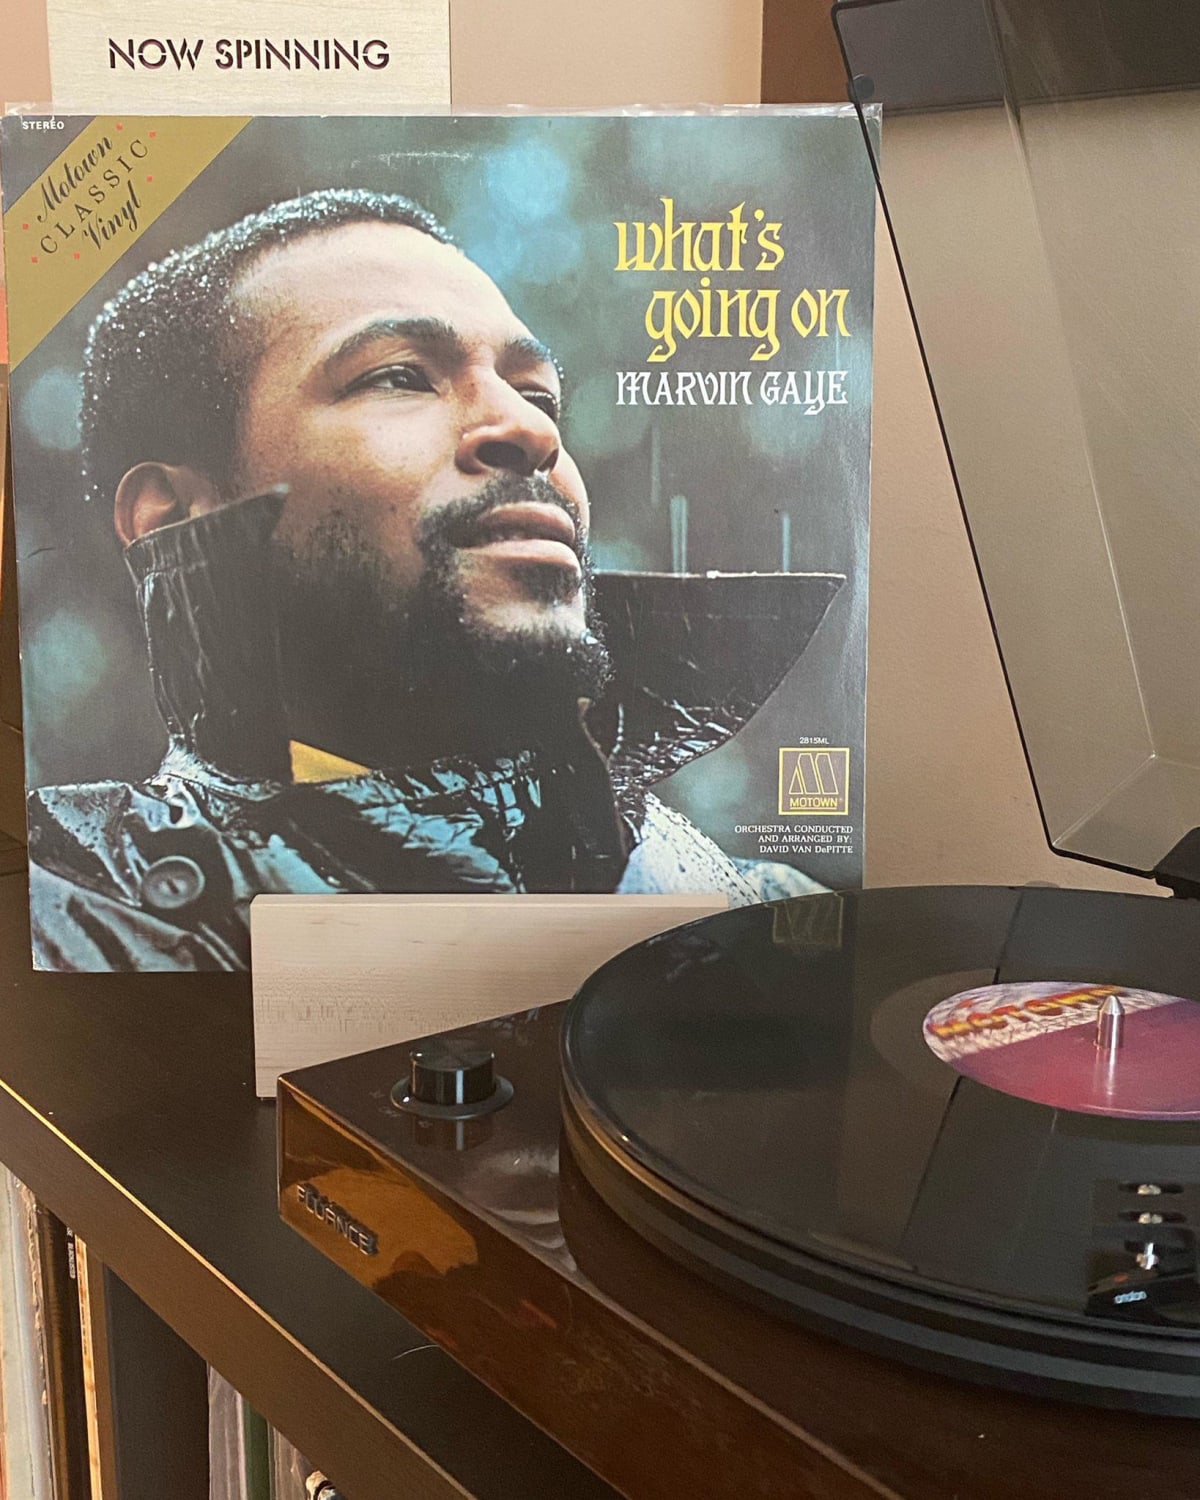 Marvin Gaye - “What’s Going On.” Released 50 Years Ago Today